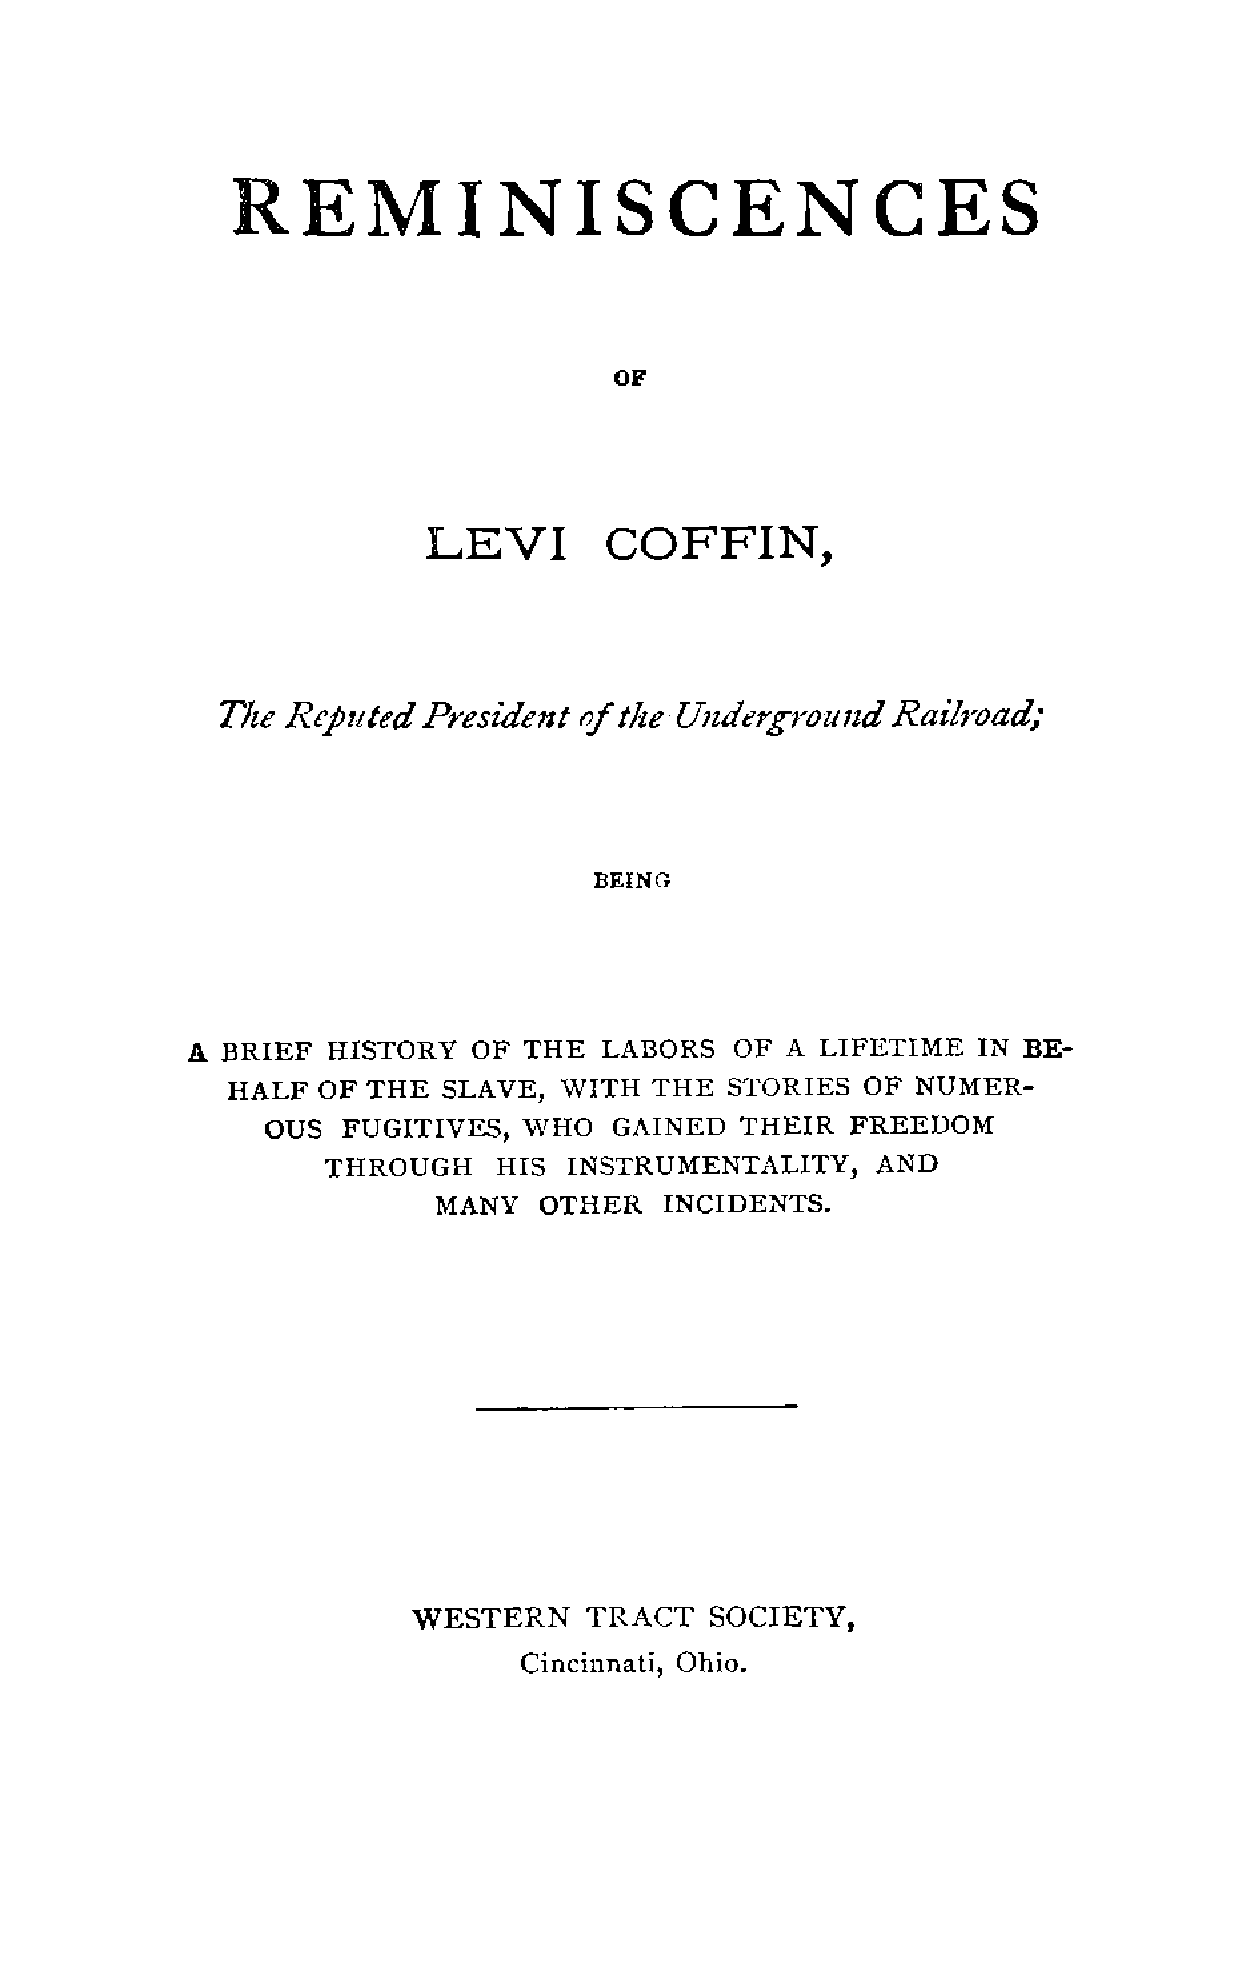 Reminiscences of Levi Coffin, the reputed president of the underground railroad : being a brief history of the labors of a lifetime in behalf of the slave, with the stories of numerous fugitives, who gained their freedom through his instrumentality, and many other incidents Preview